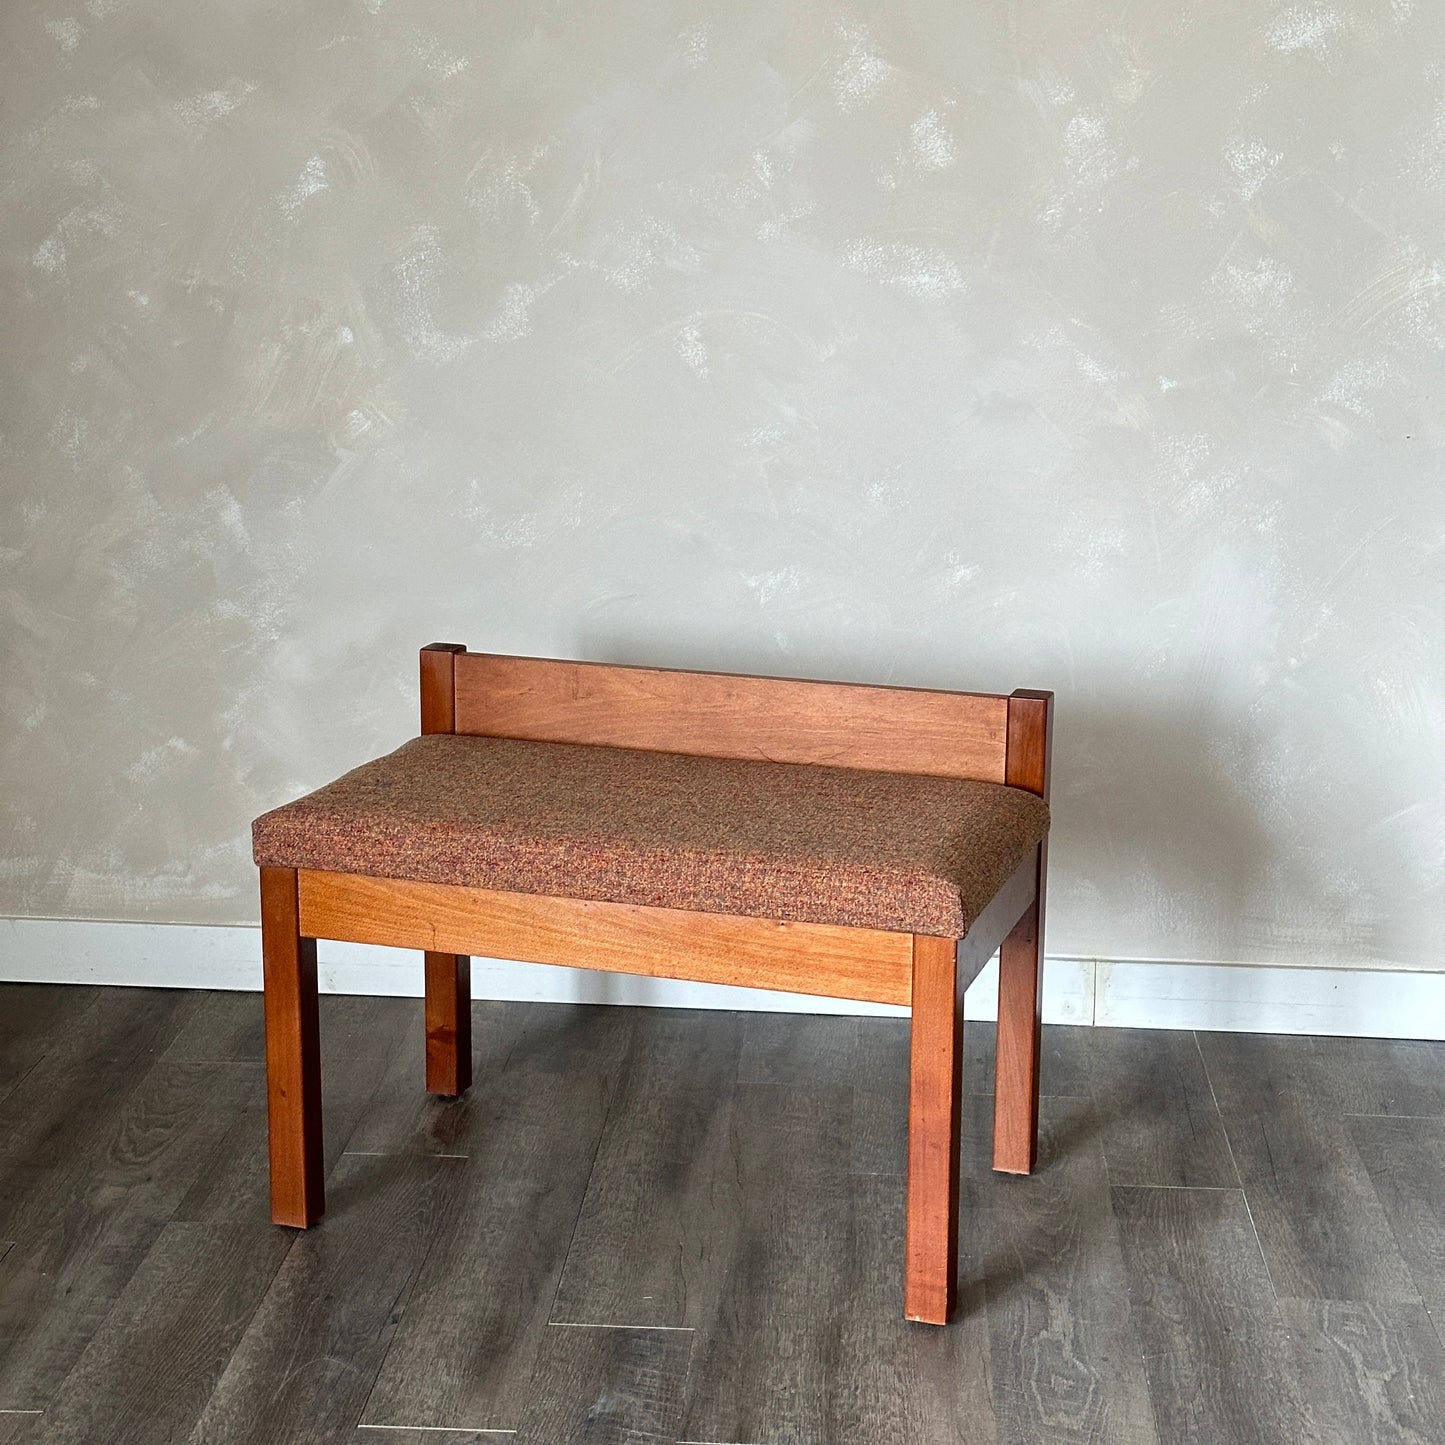 Newly Upholstered Vintage Wooden Bench